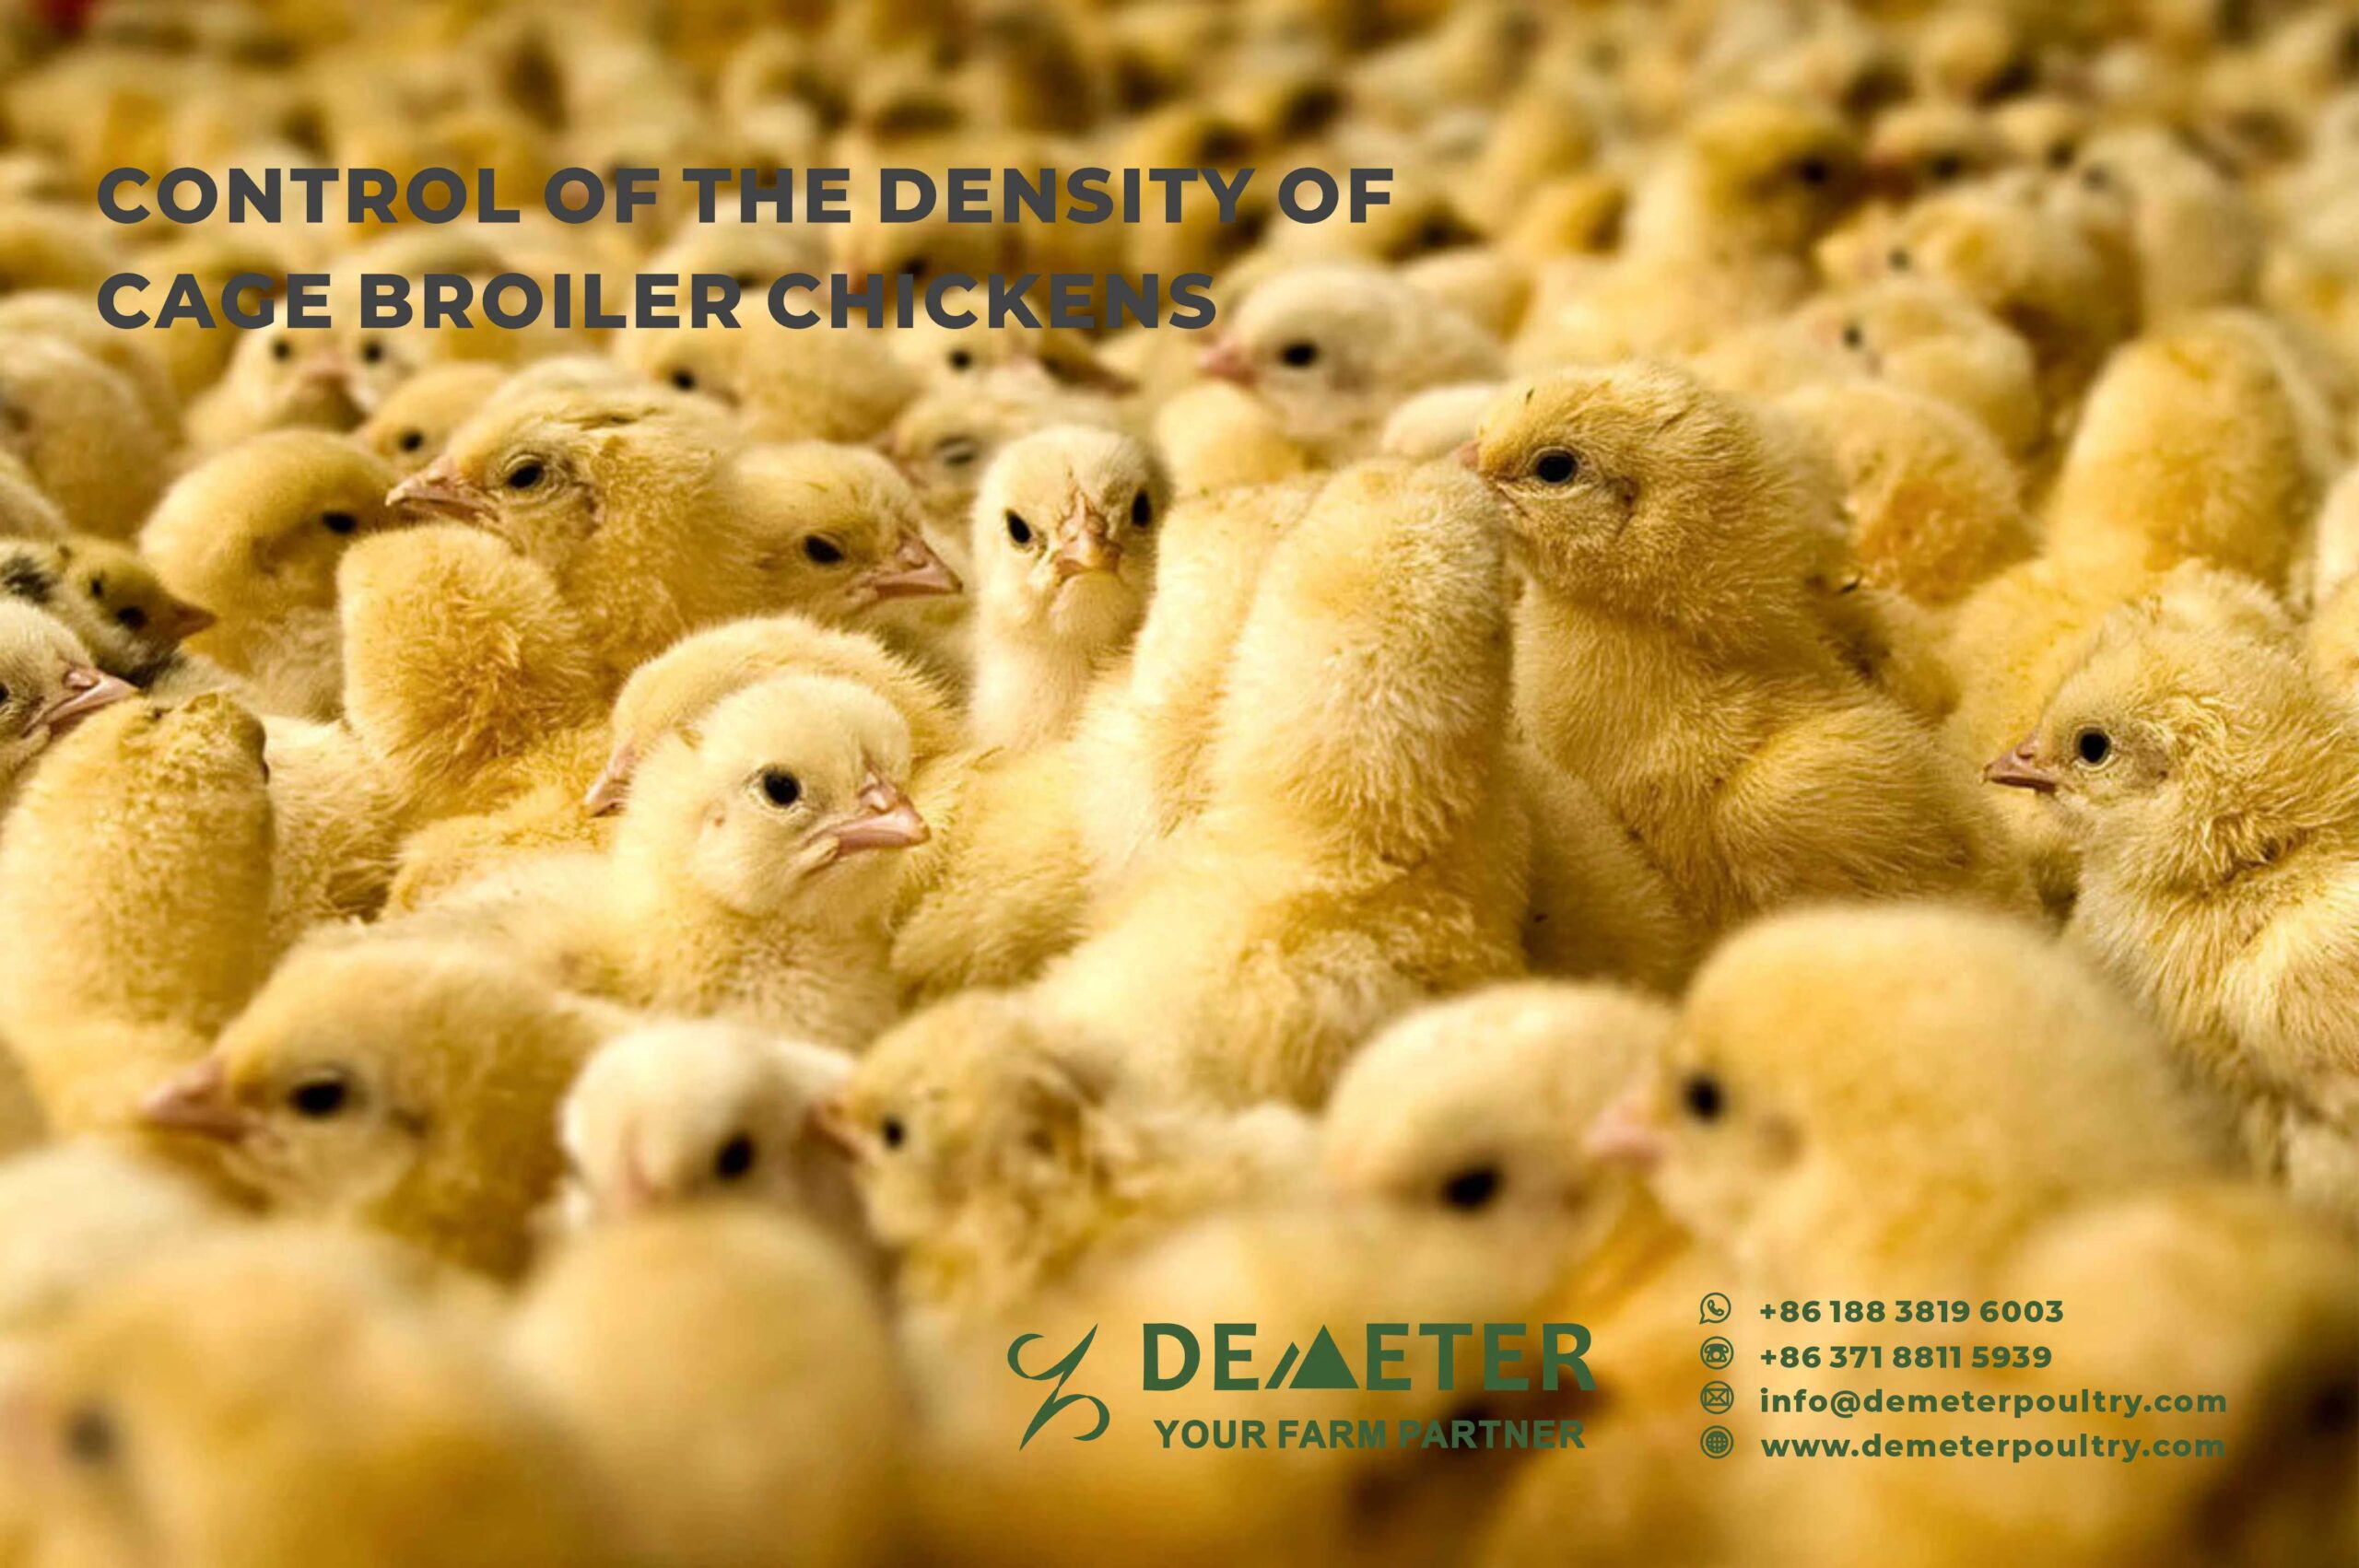 Control Of The Density Of Caged Broiler Chickens